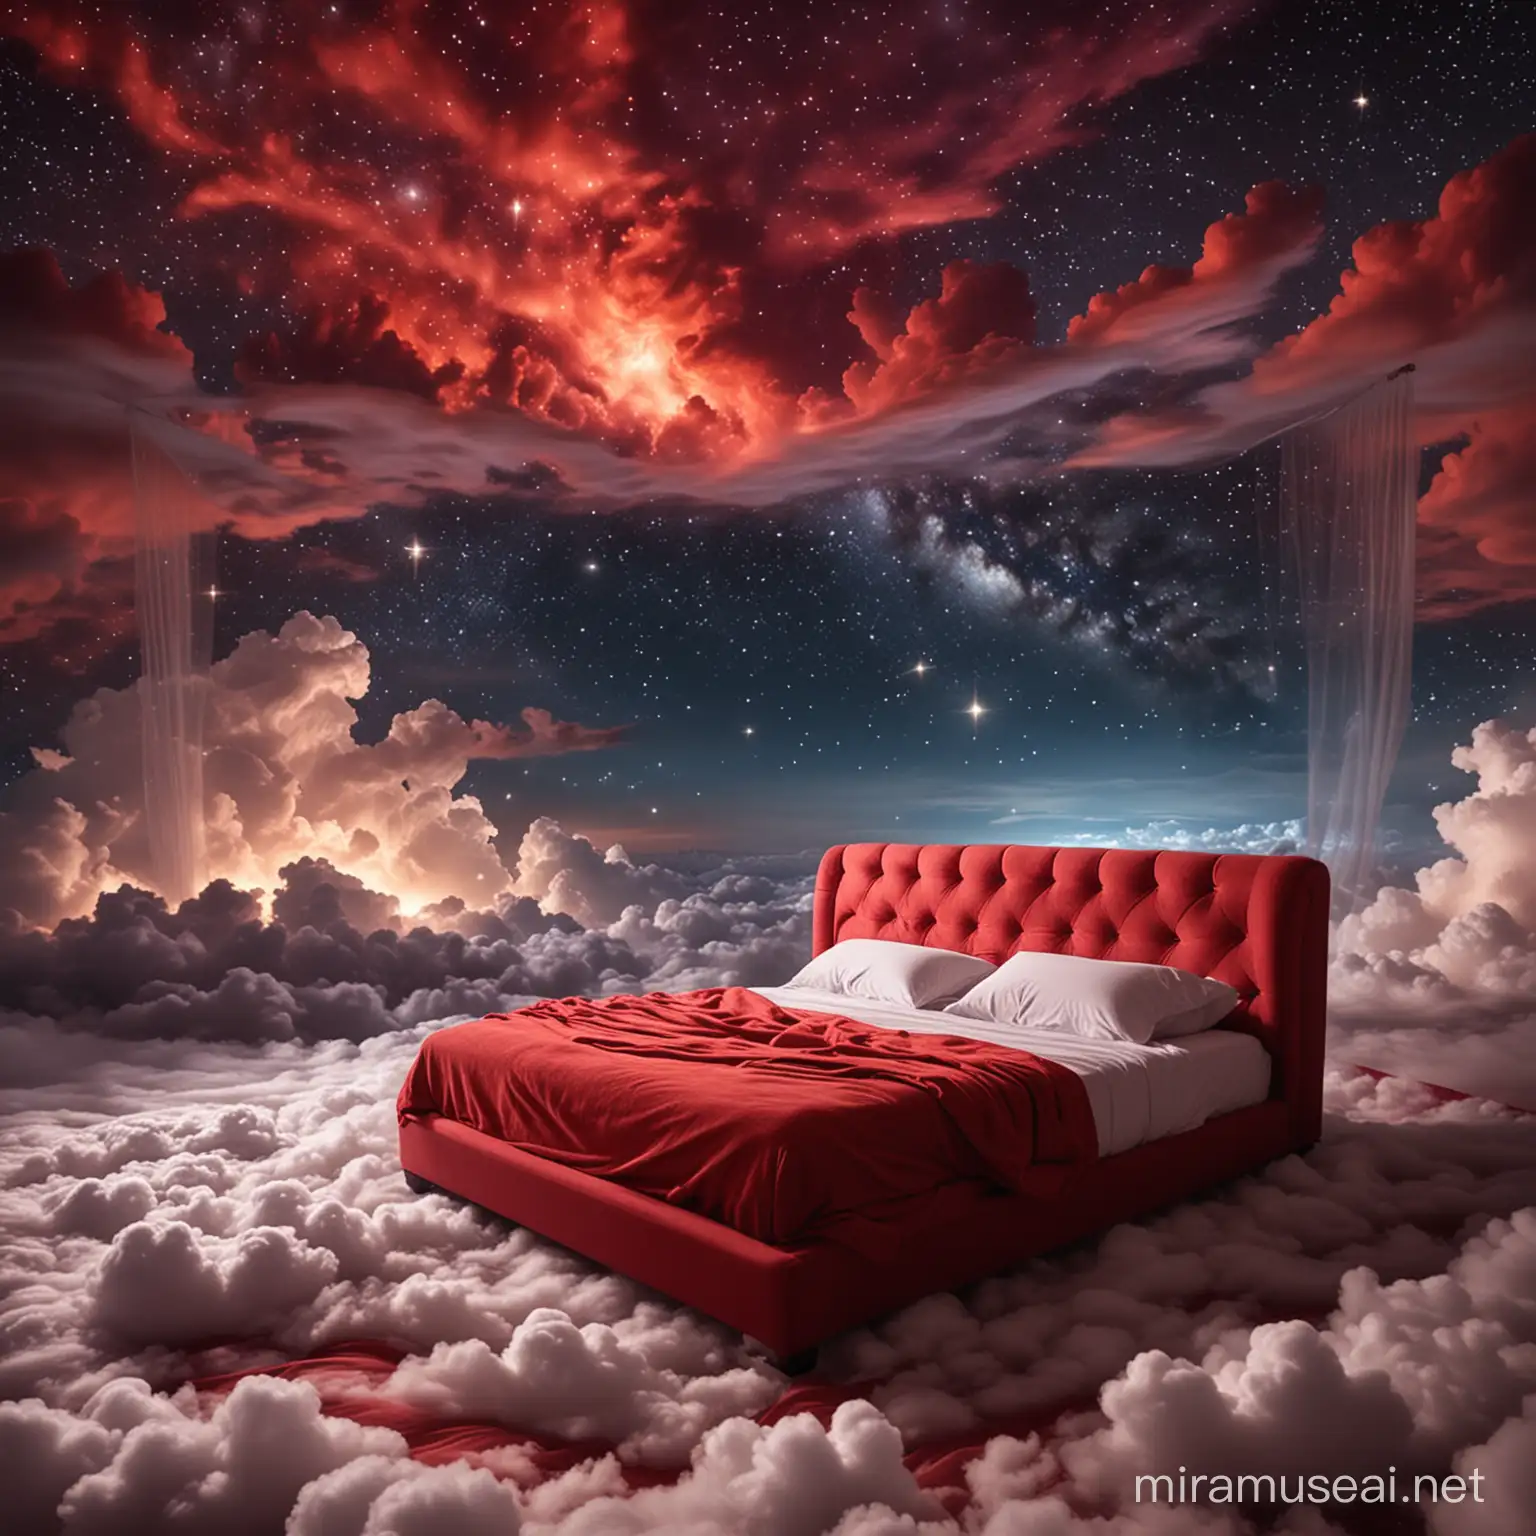 Comfortable Red Bed Surrounded by Celestial Clouds and Stars